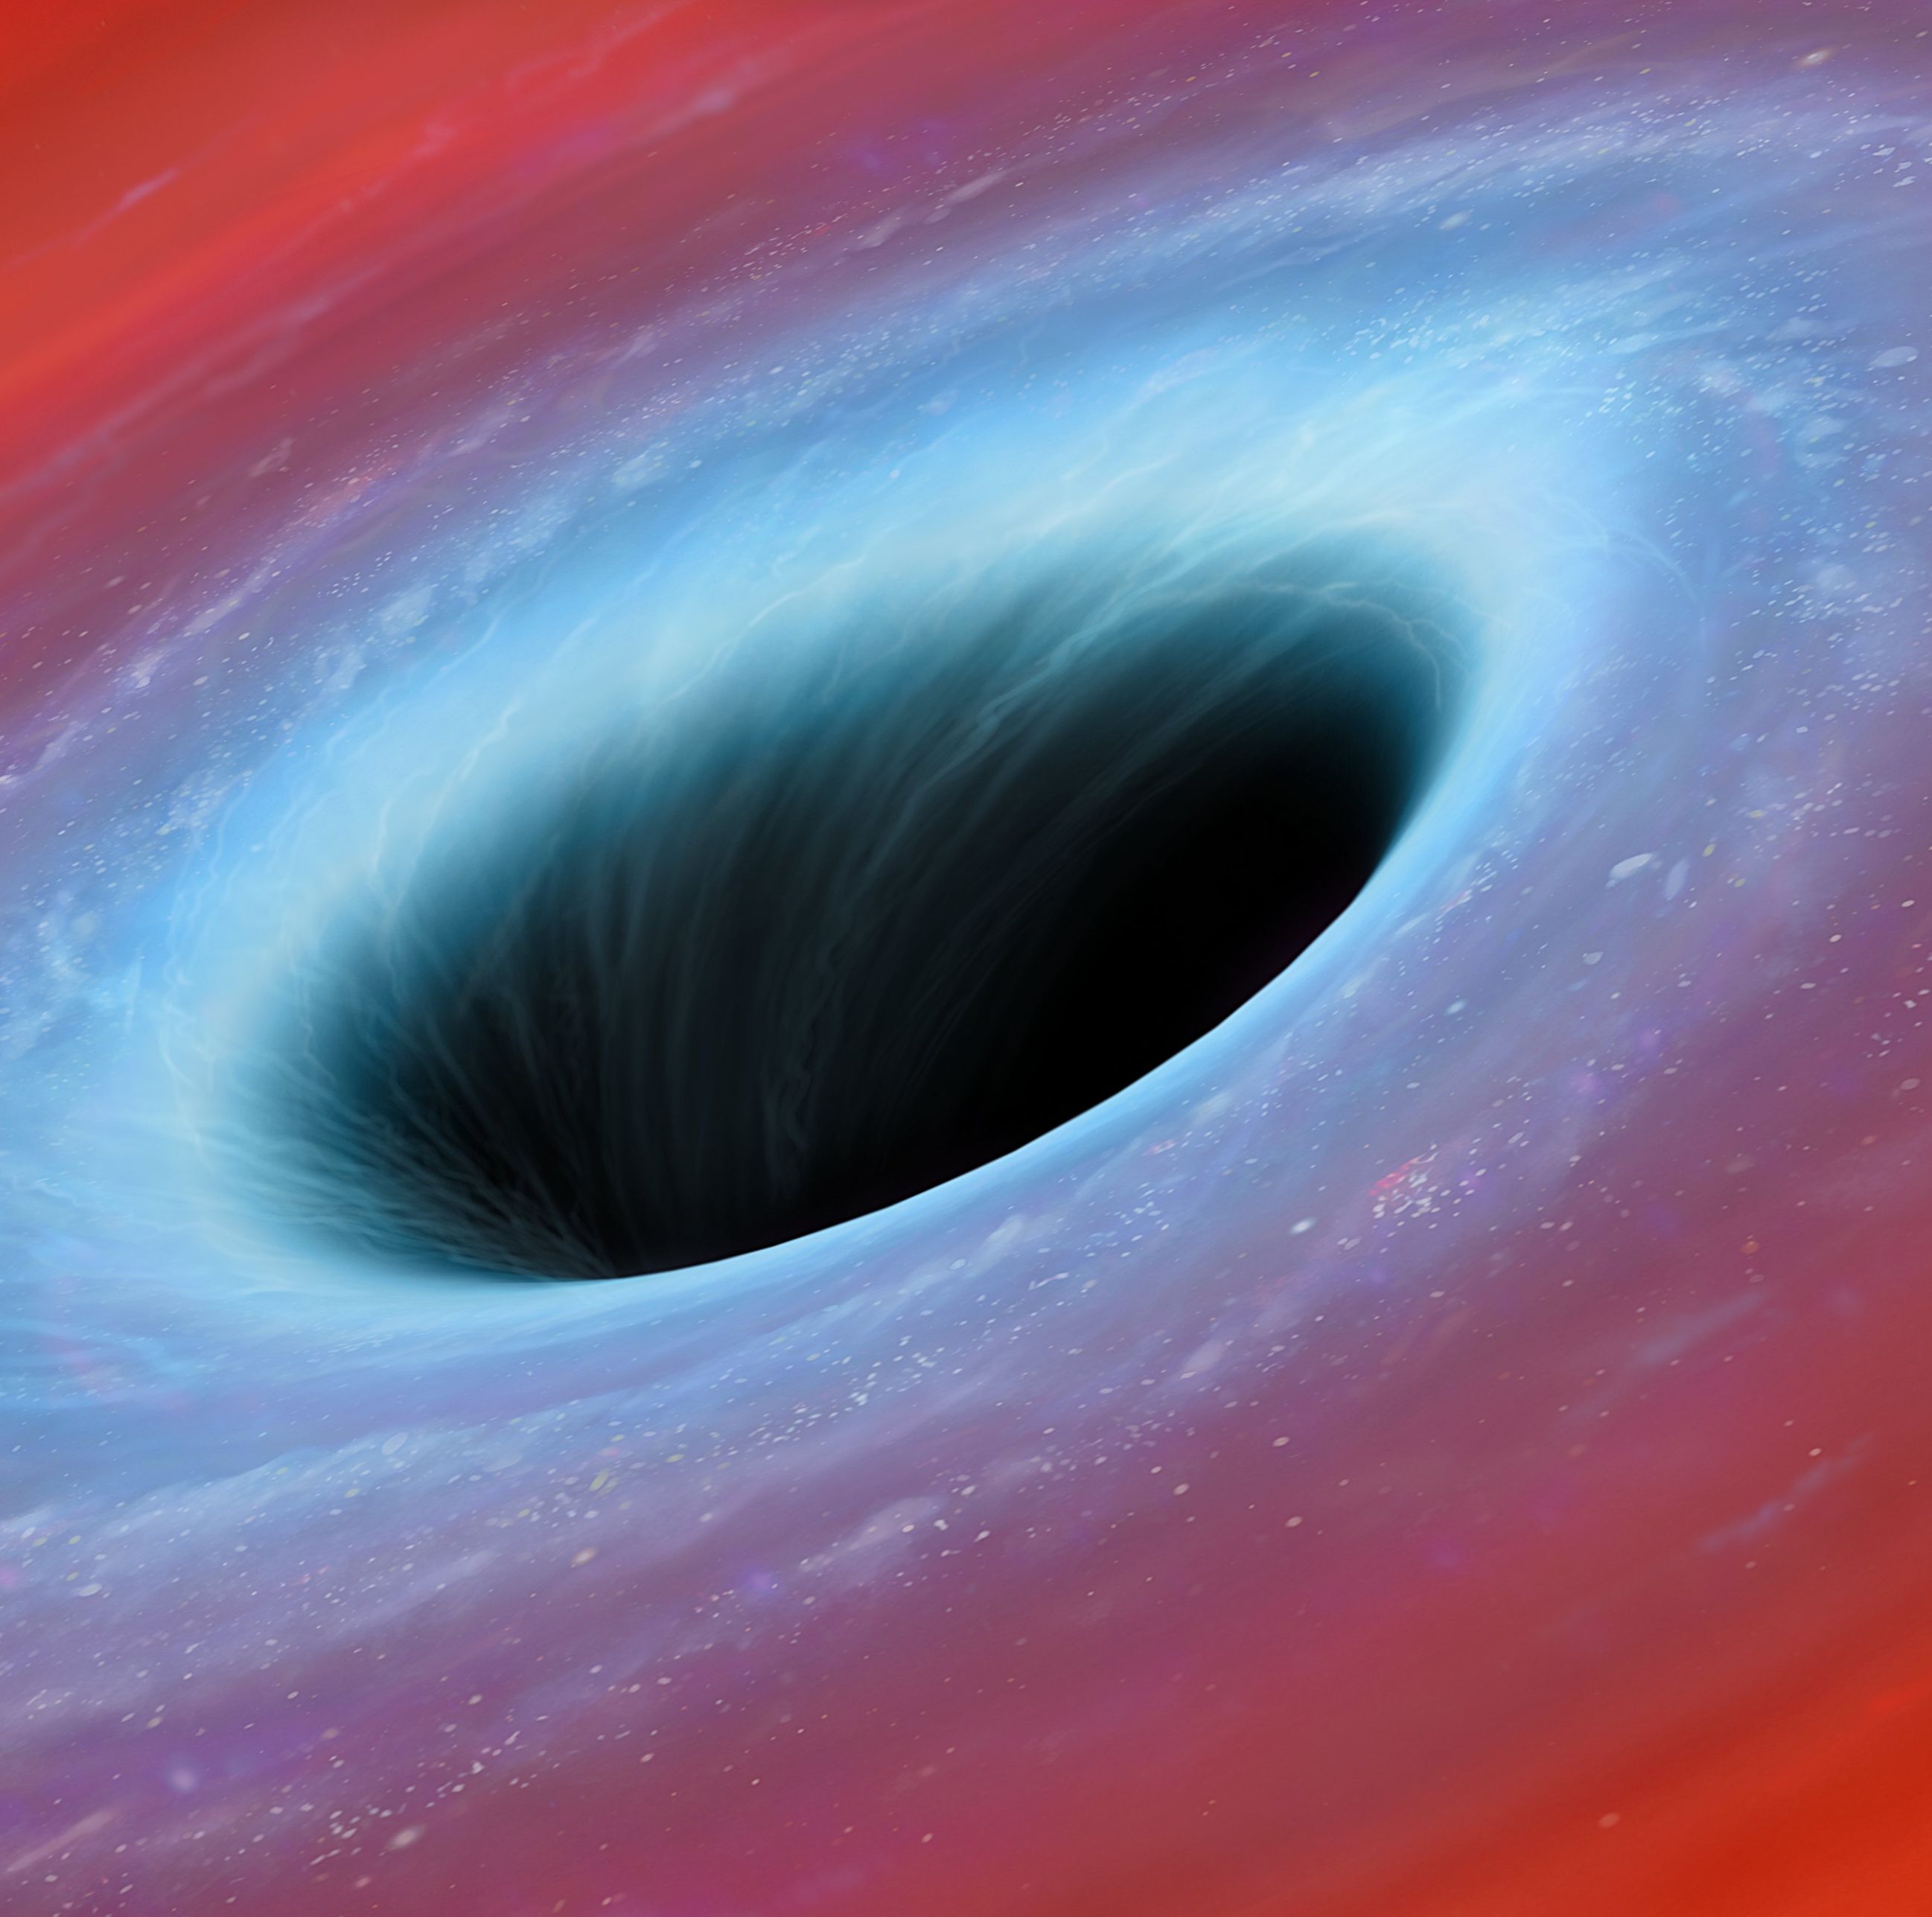 Black Holes May Not Be Black. Or Even Holes.